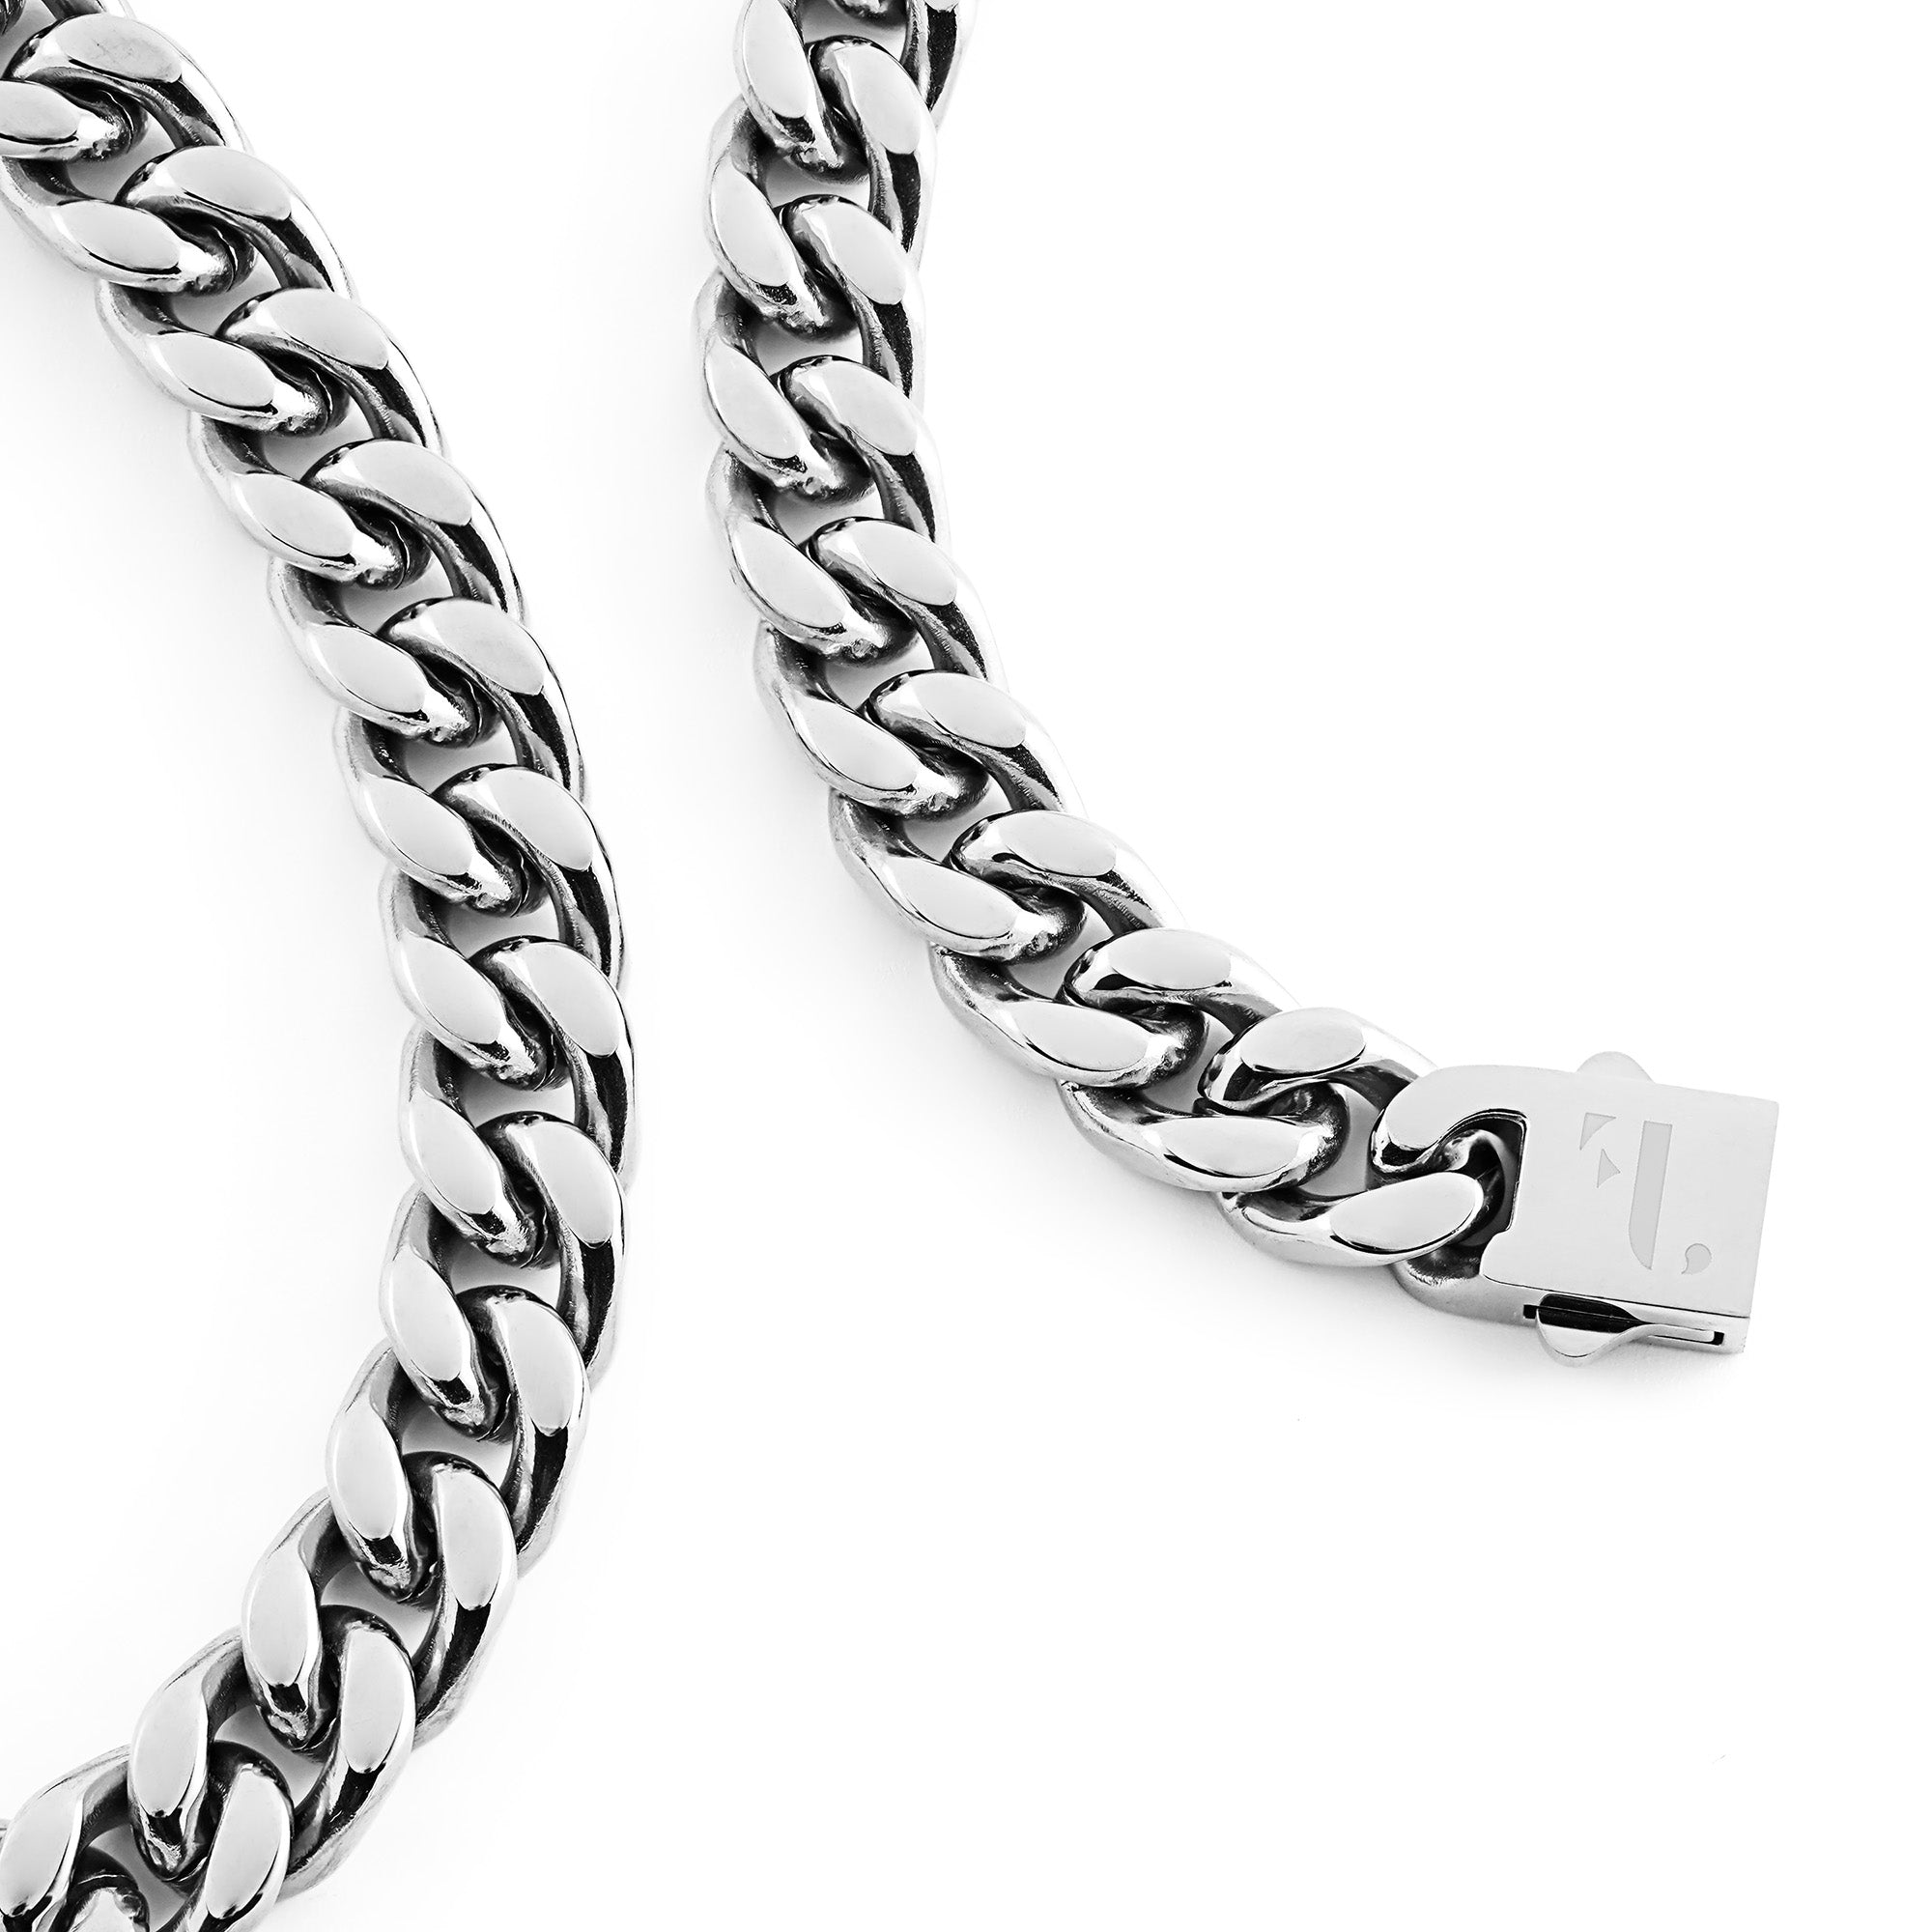 Cass men's necklace by Five Jwlry, designed with a 10mm tightly woven Cuban link chain in a silver hue, crafted from water-resistant 316L stainless steel. Available in sizes 40cm, 45cm, 50cm, 55cm and 60cm. Hypoallergenic and accompanied by a 2-year warranty.